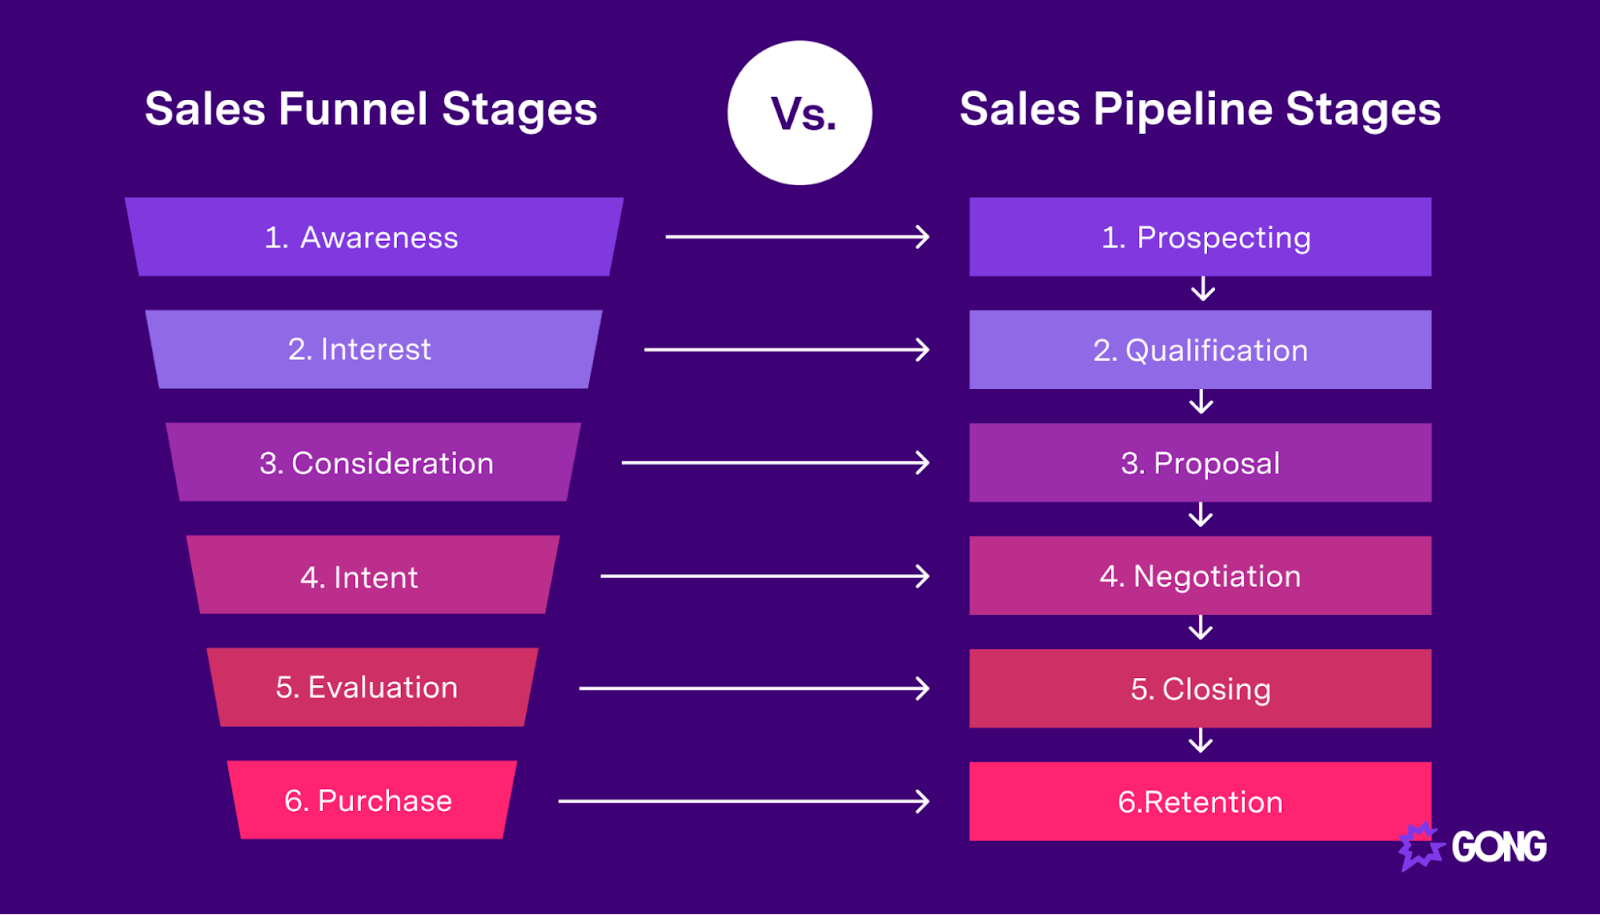 The difference between sales funnel stages and sales pipeline stages